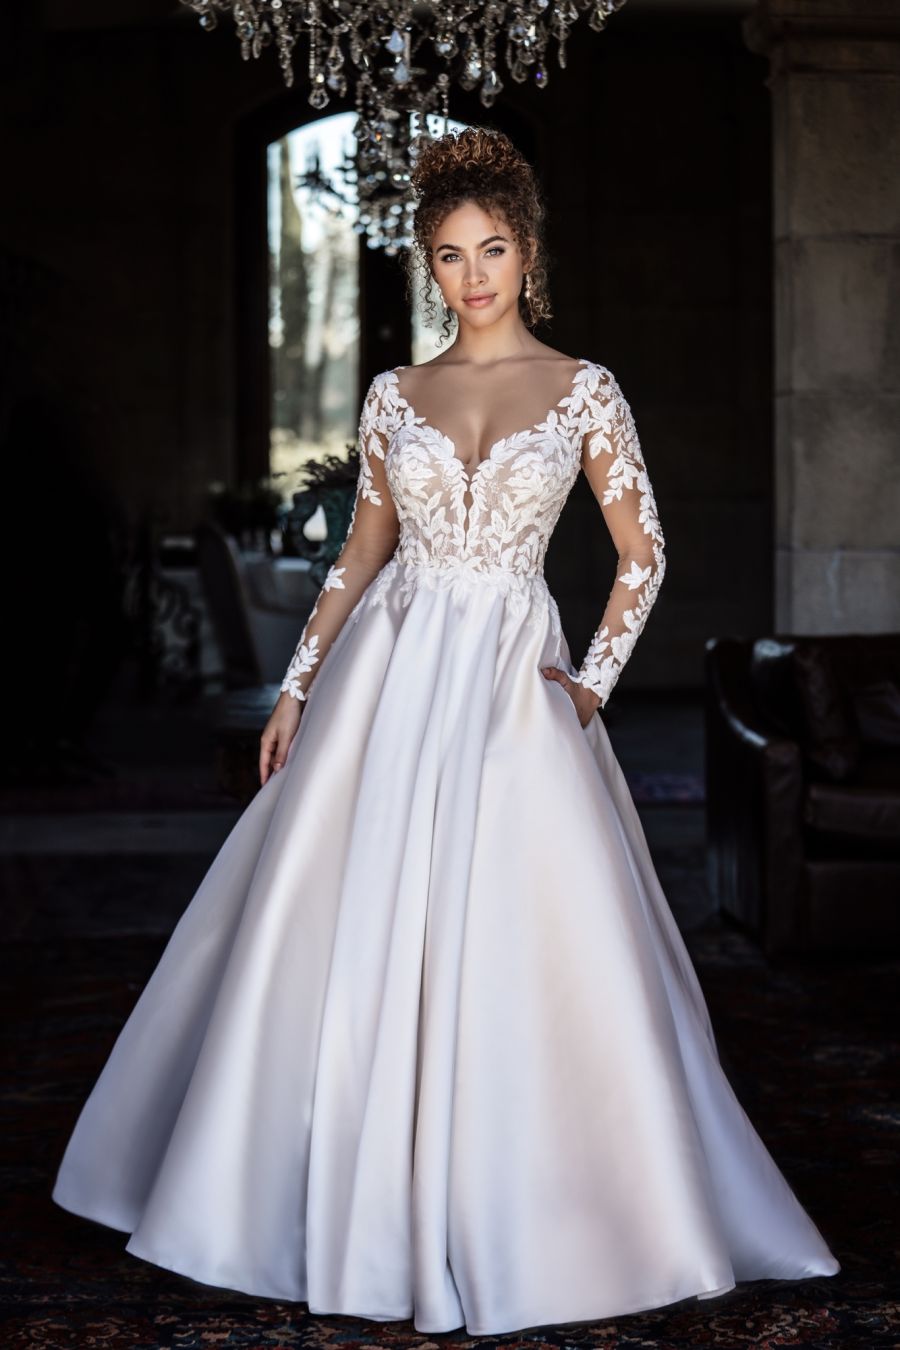 Long Sleeve Ball Gown Wedding Dress With Lace Bodice And Mikado Skirt |  Kleinfeld Bridal